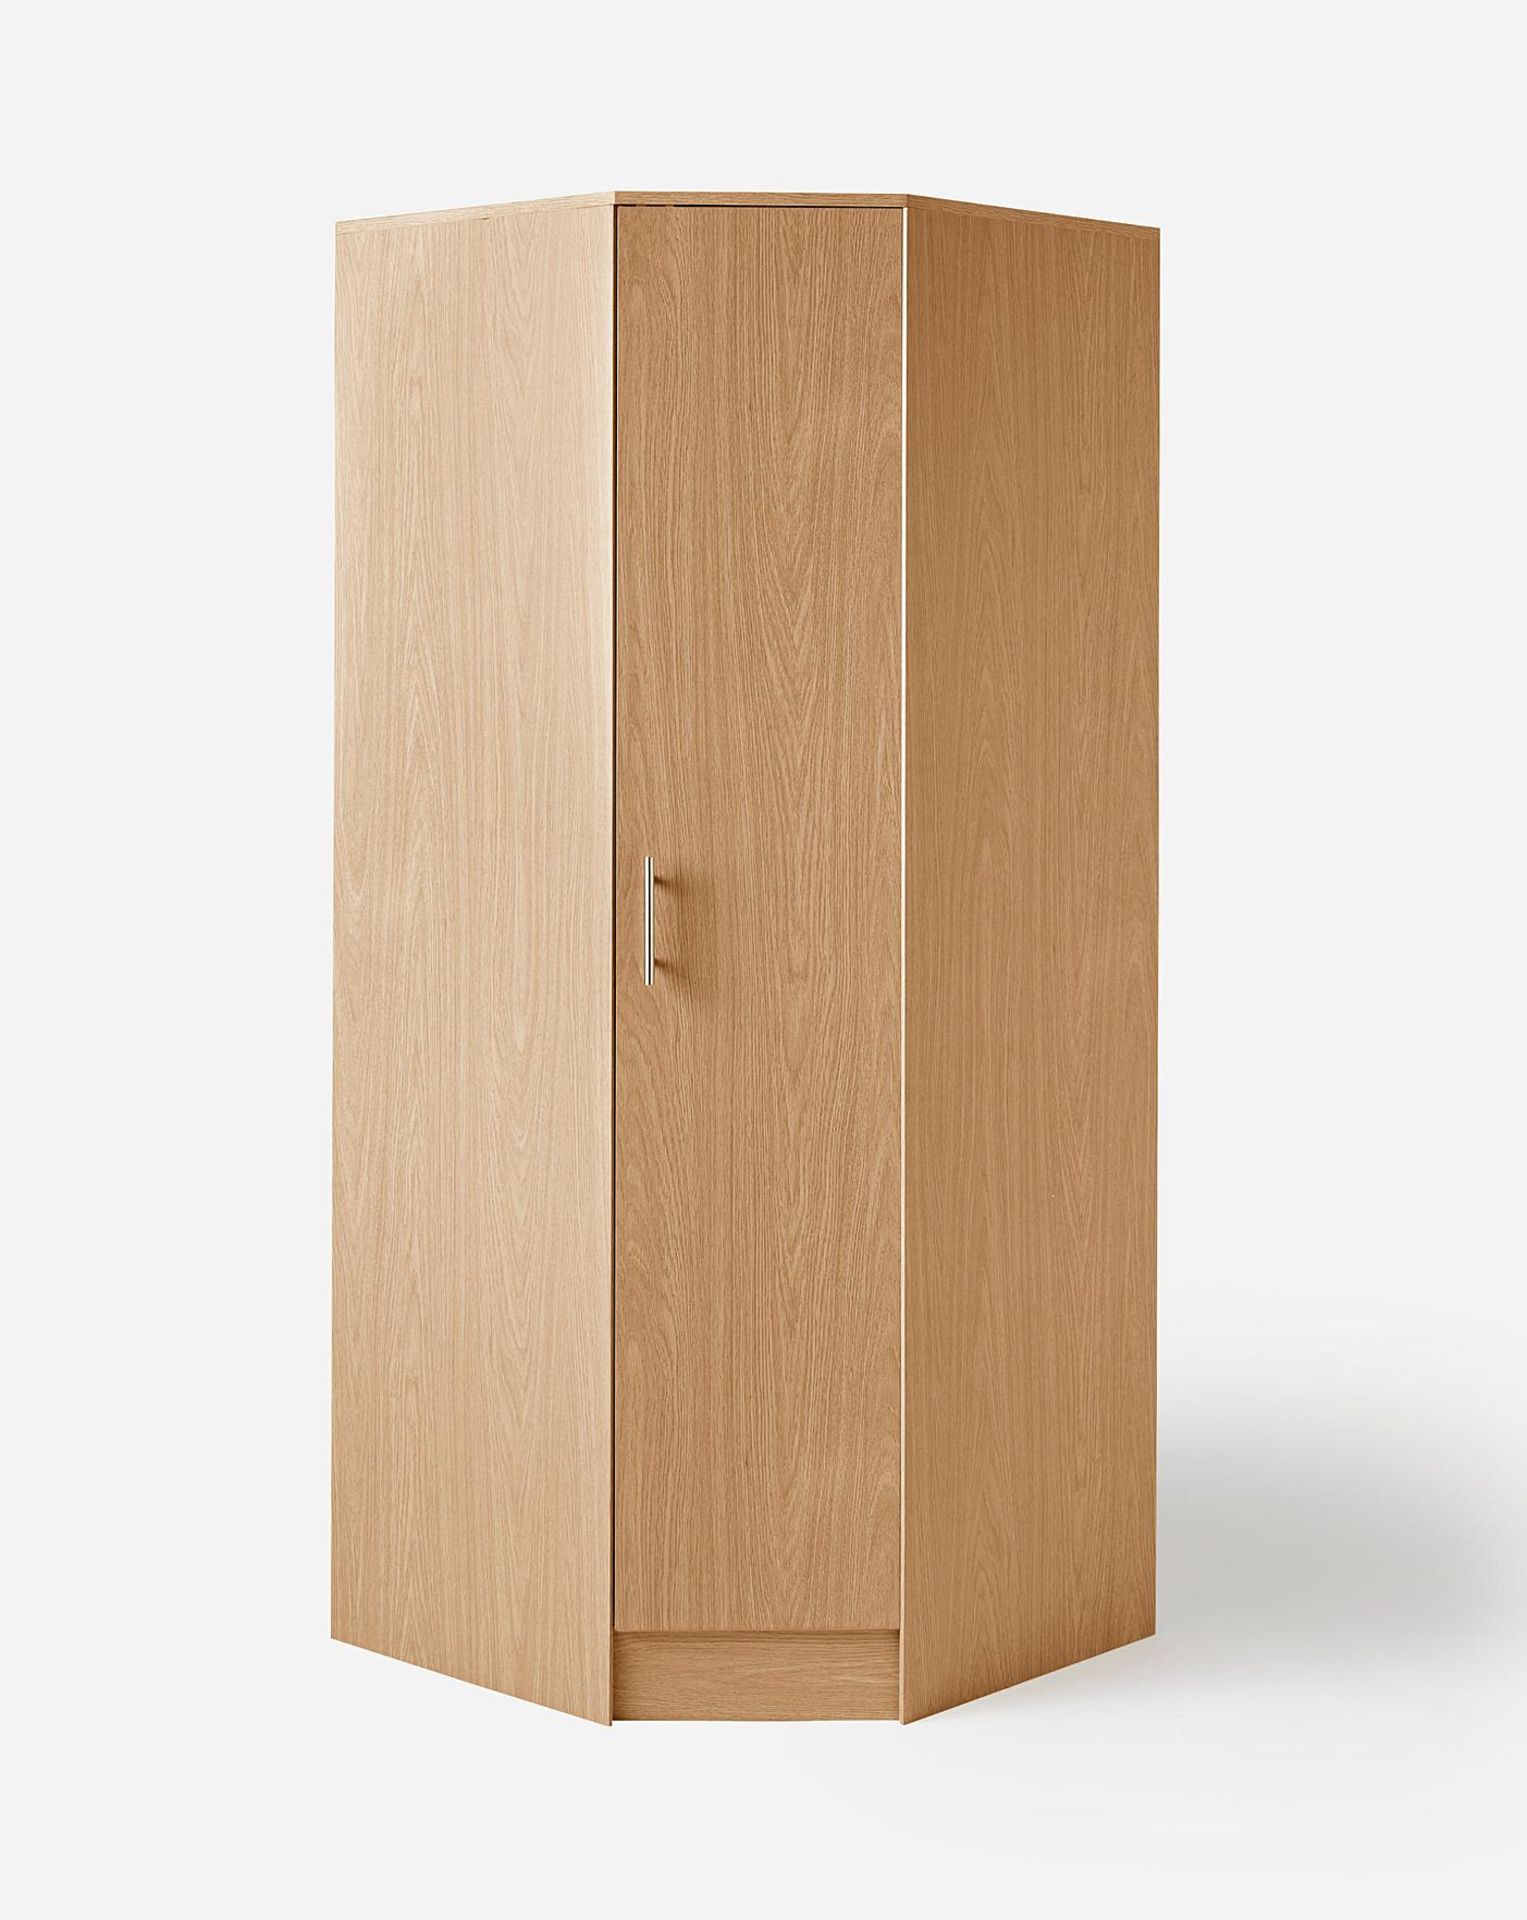 NEW & BOXED DAKOTA Corner Wardrobe. OAK EFFECT. RRP £269 EACH. Part of At Home Collection, the - Image 3 of 4